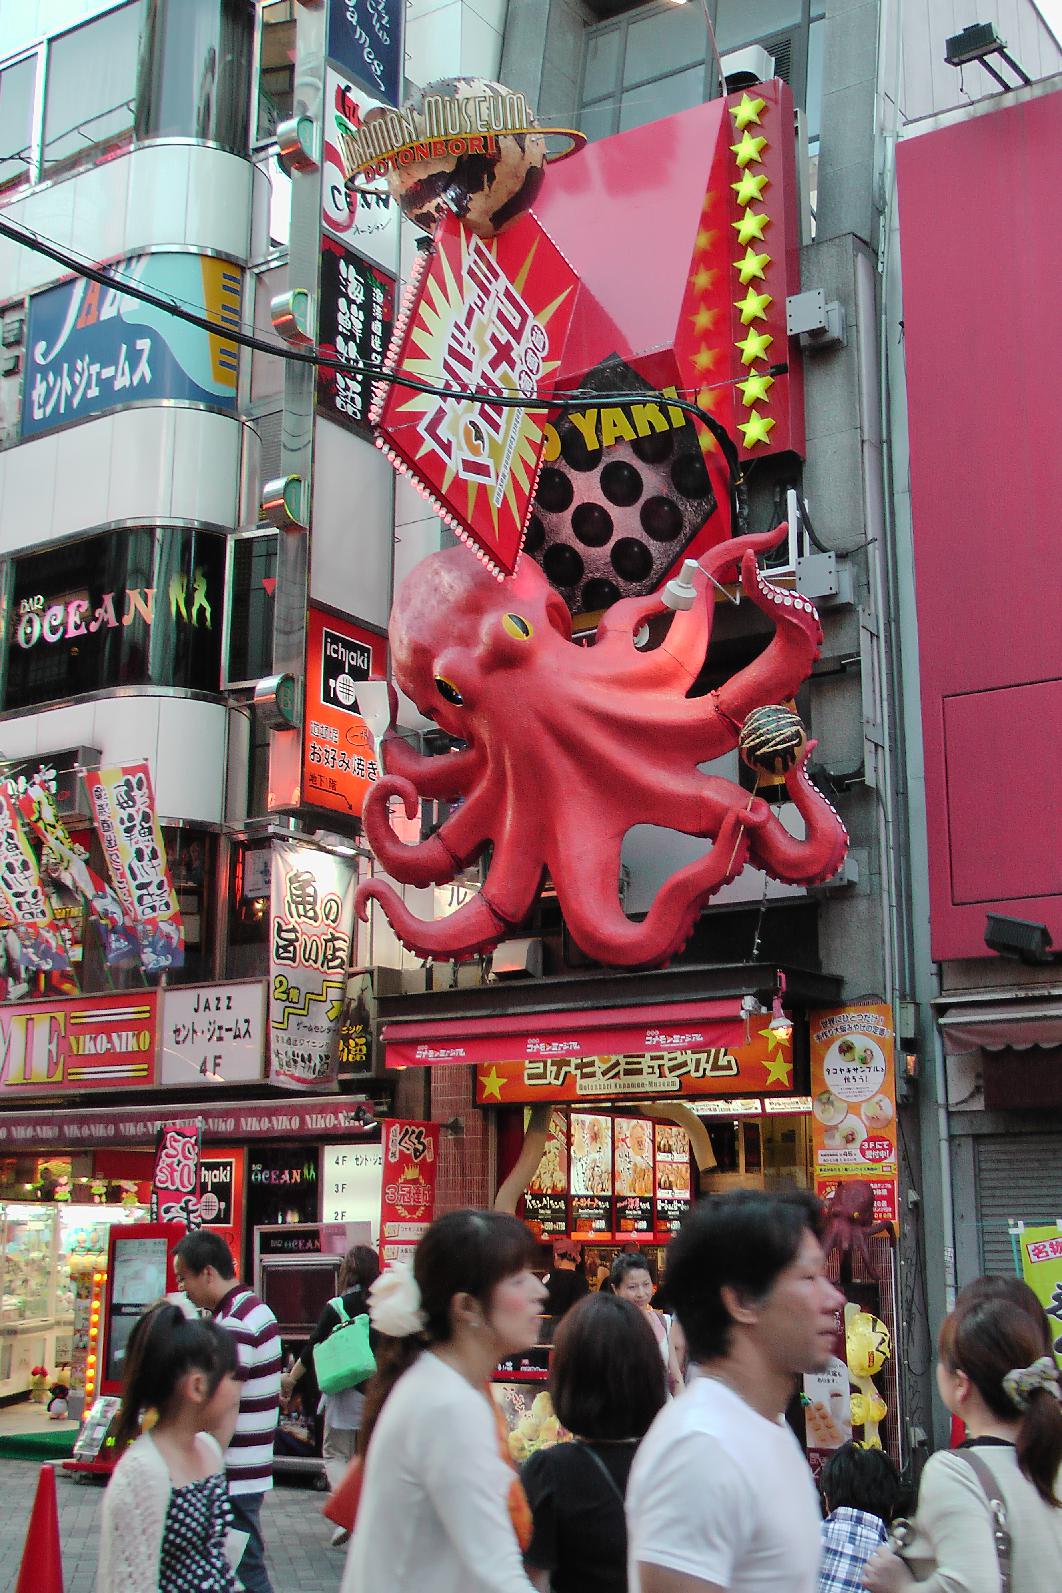 Restaurants with crazy/mad promotion methods close to the Dōtonbori canal.